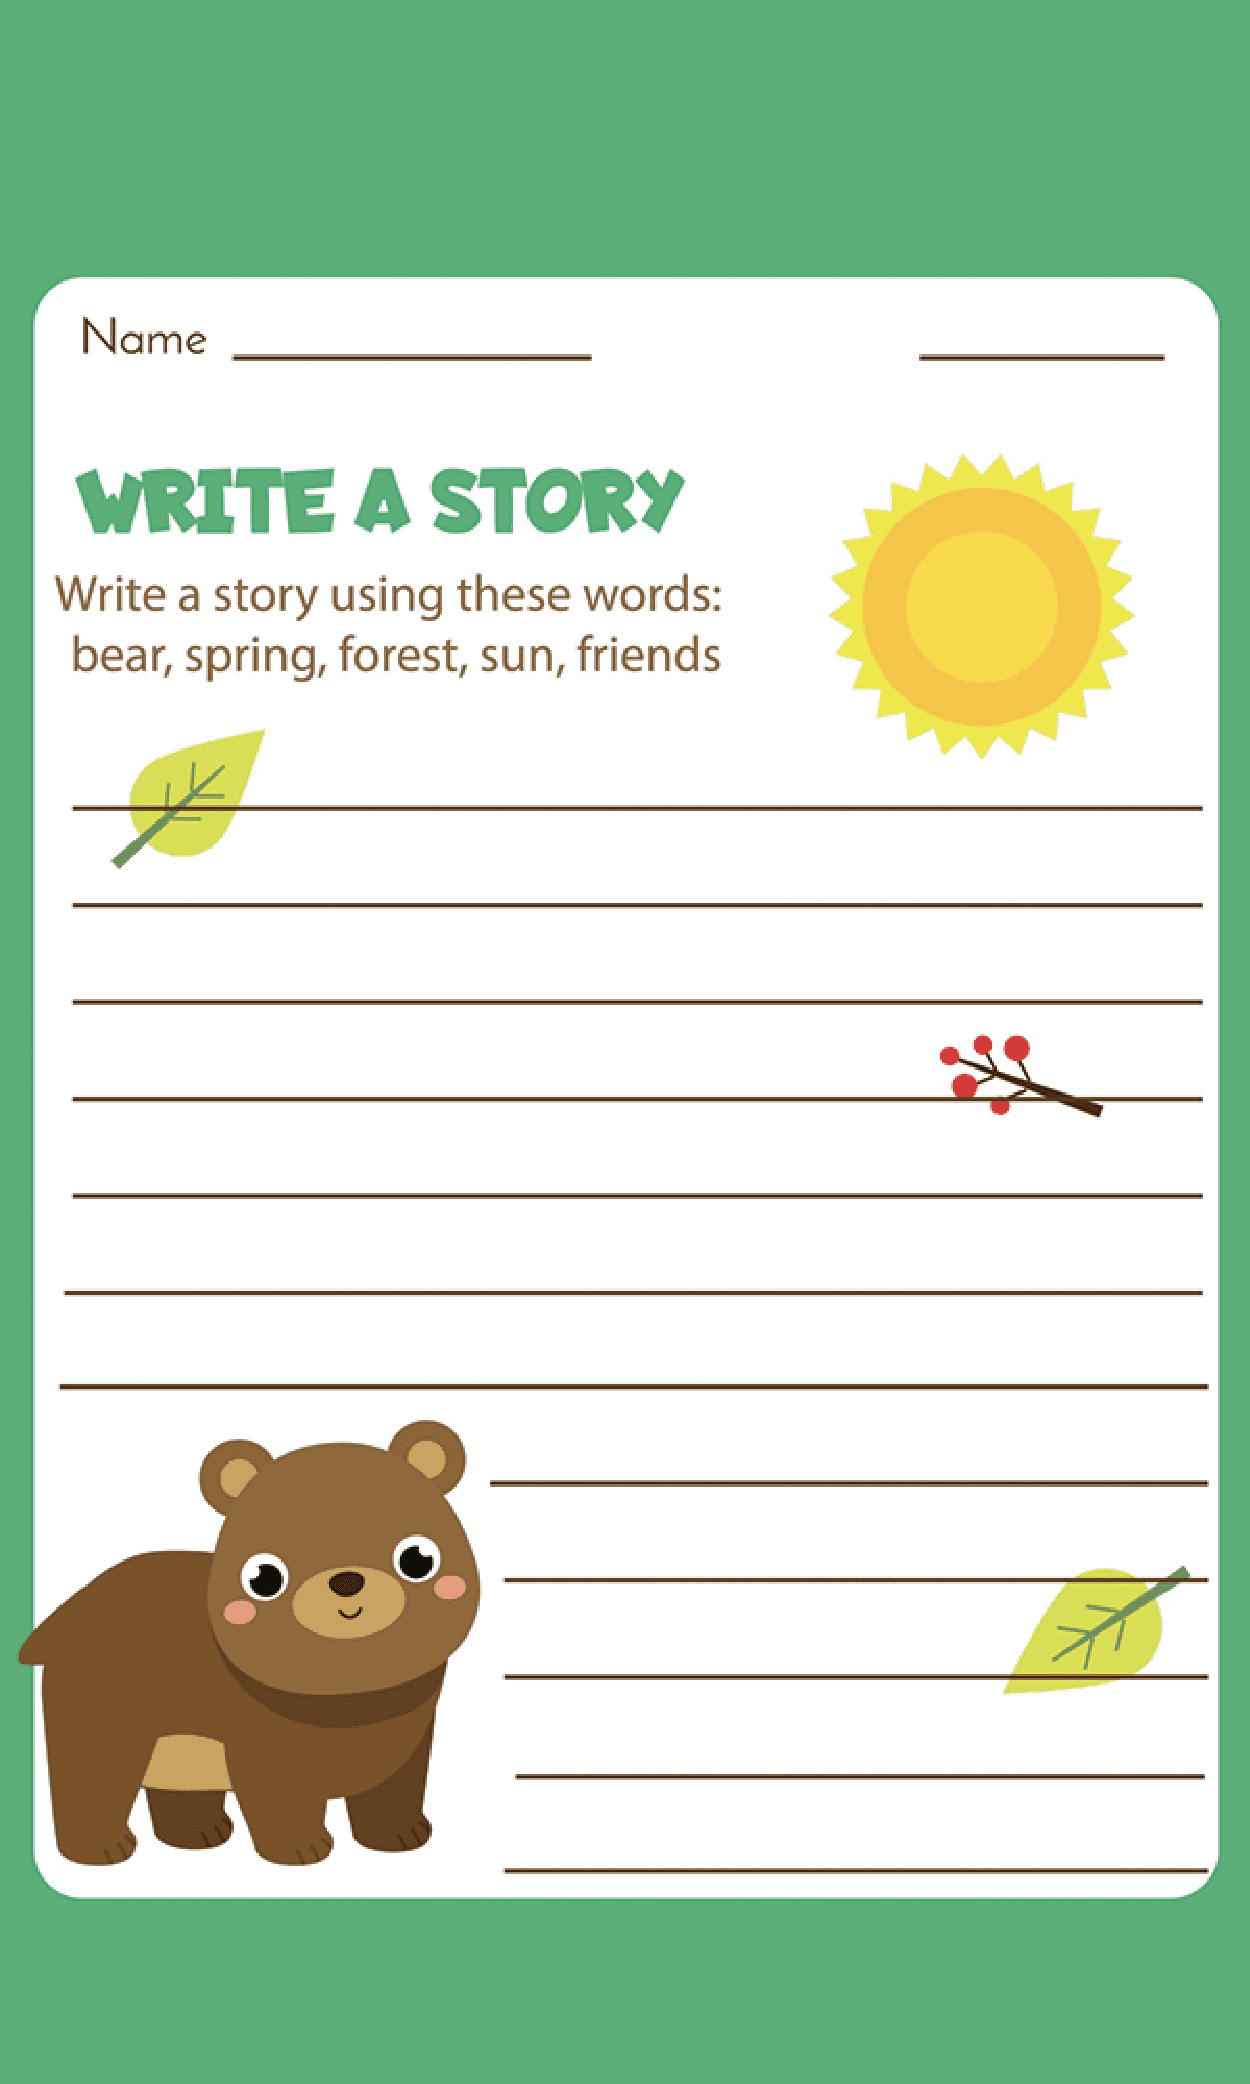 Write-A-Story-Forest-Worksheet